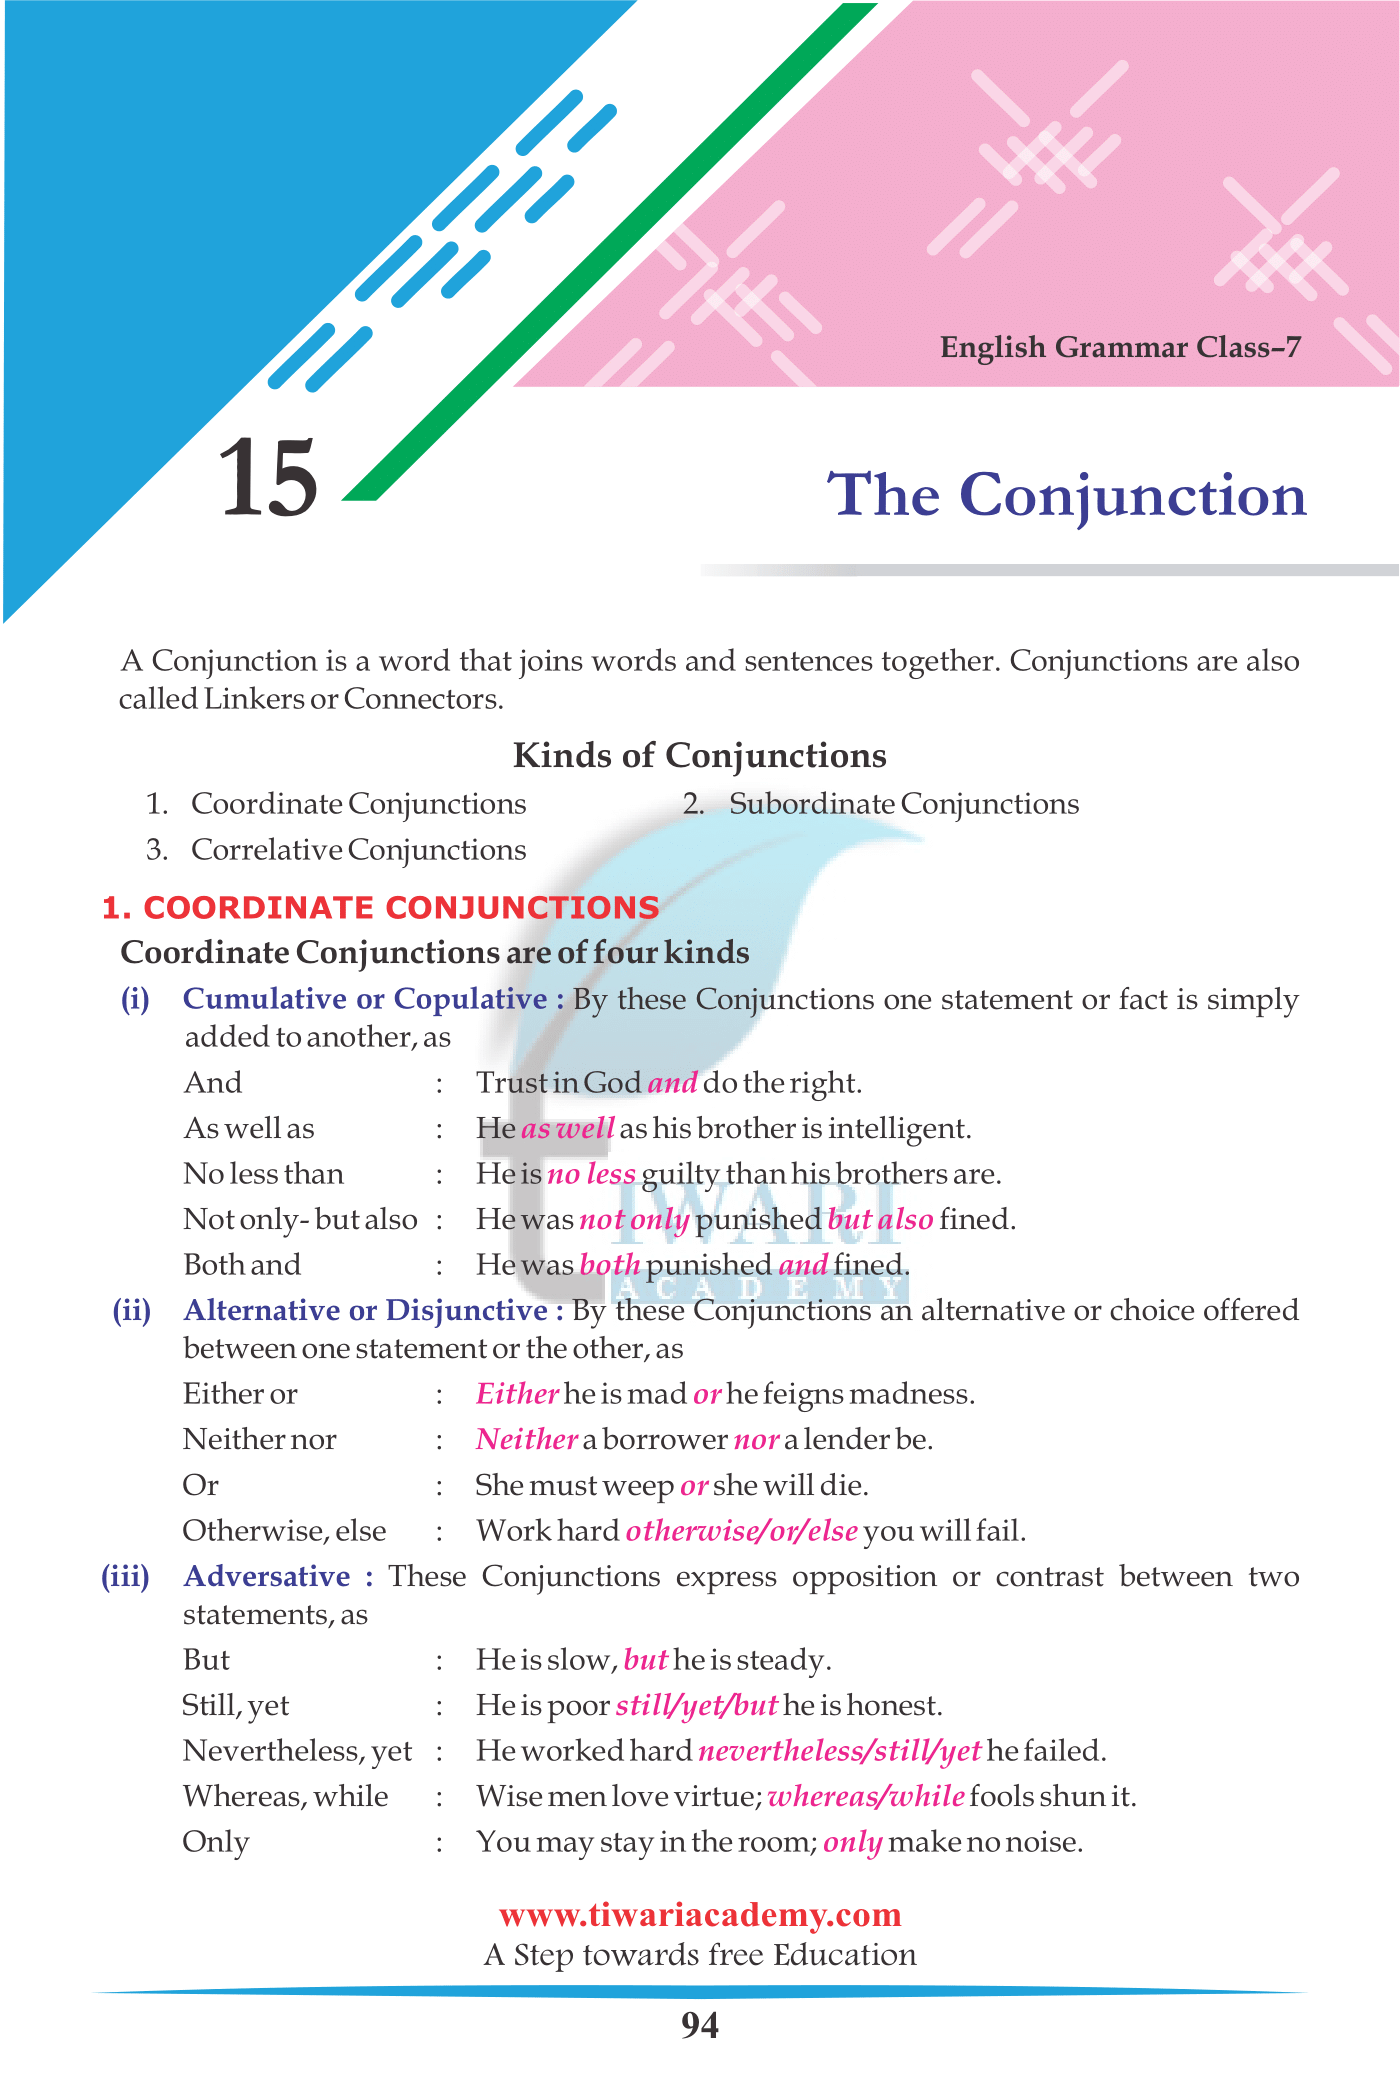 Class 7 English Grammar Chapter 15 The Conjunction for session 2022-2023